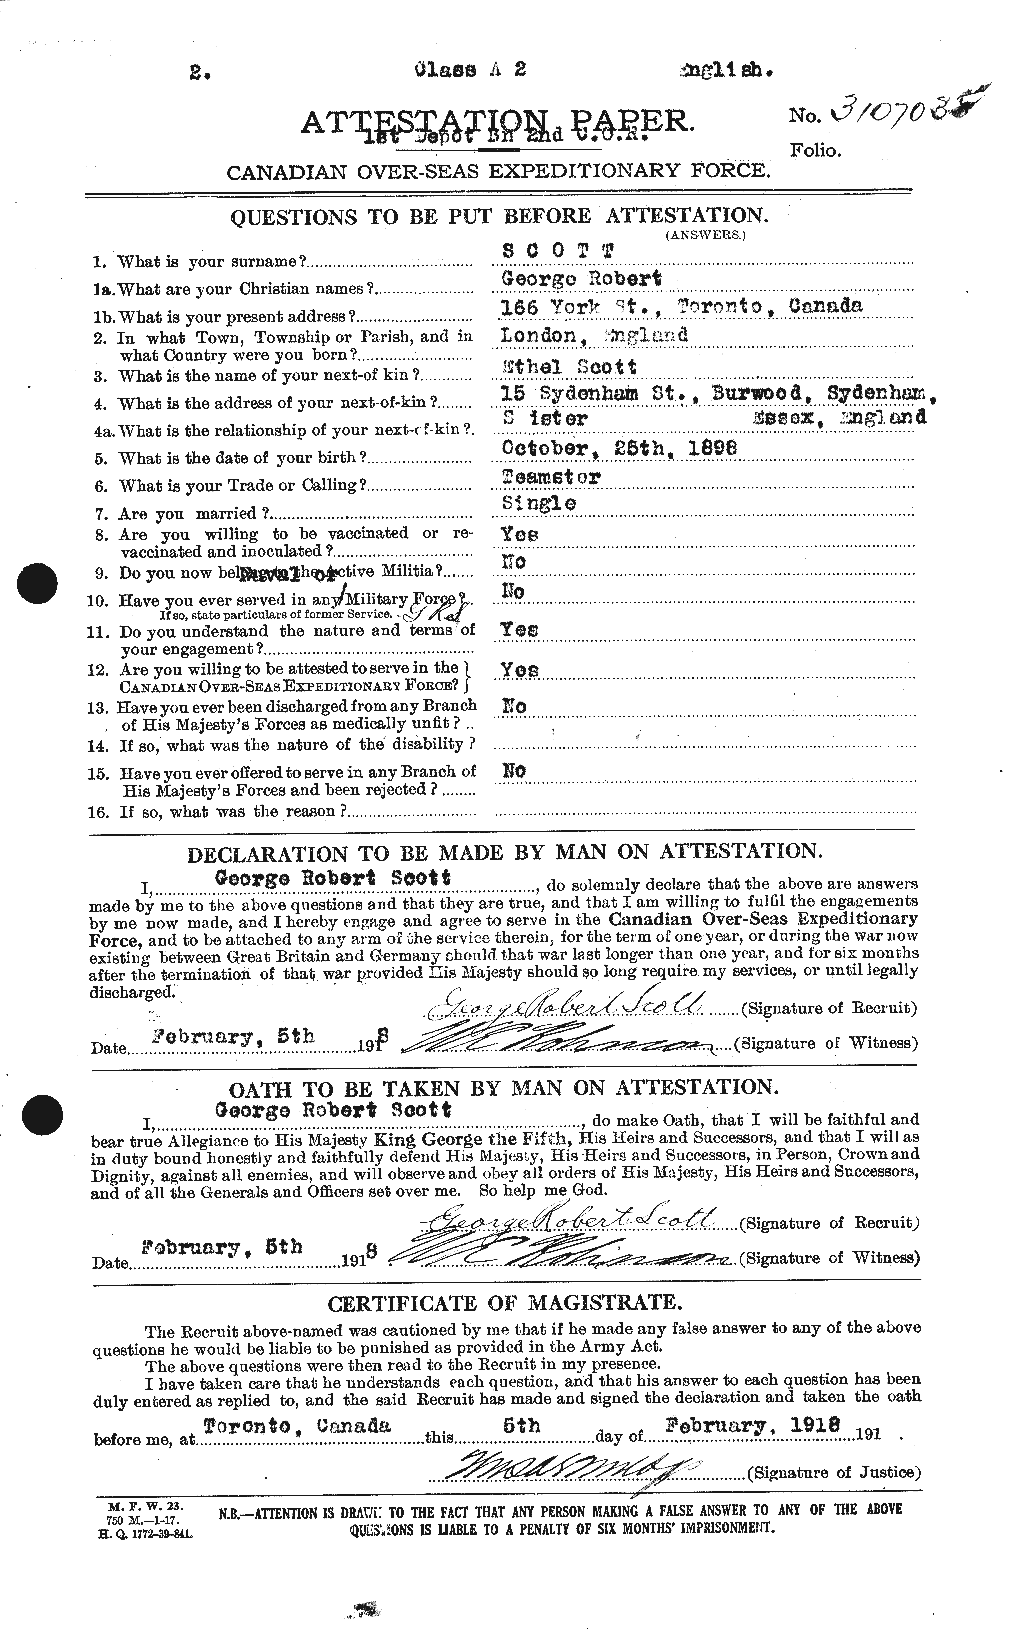 Personnel Records of the First World War - CEF 083150a